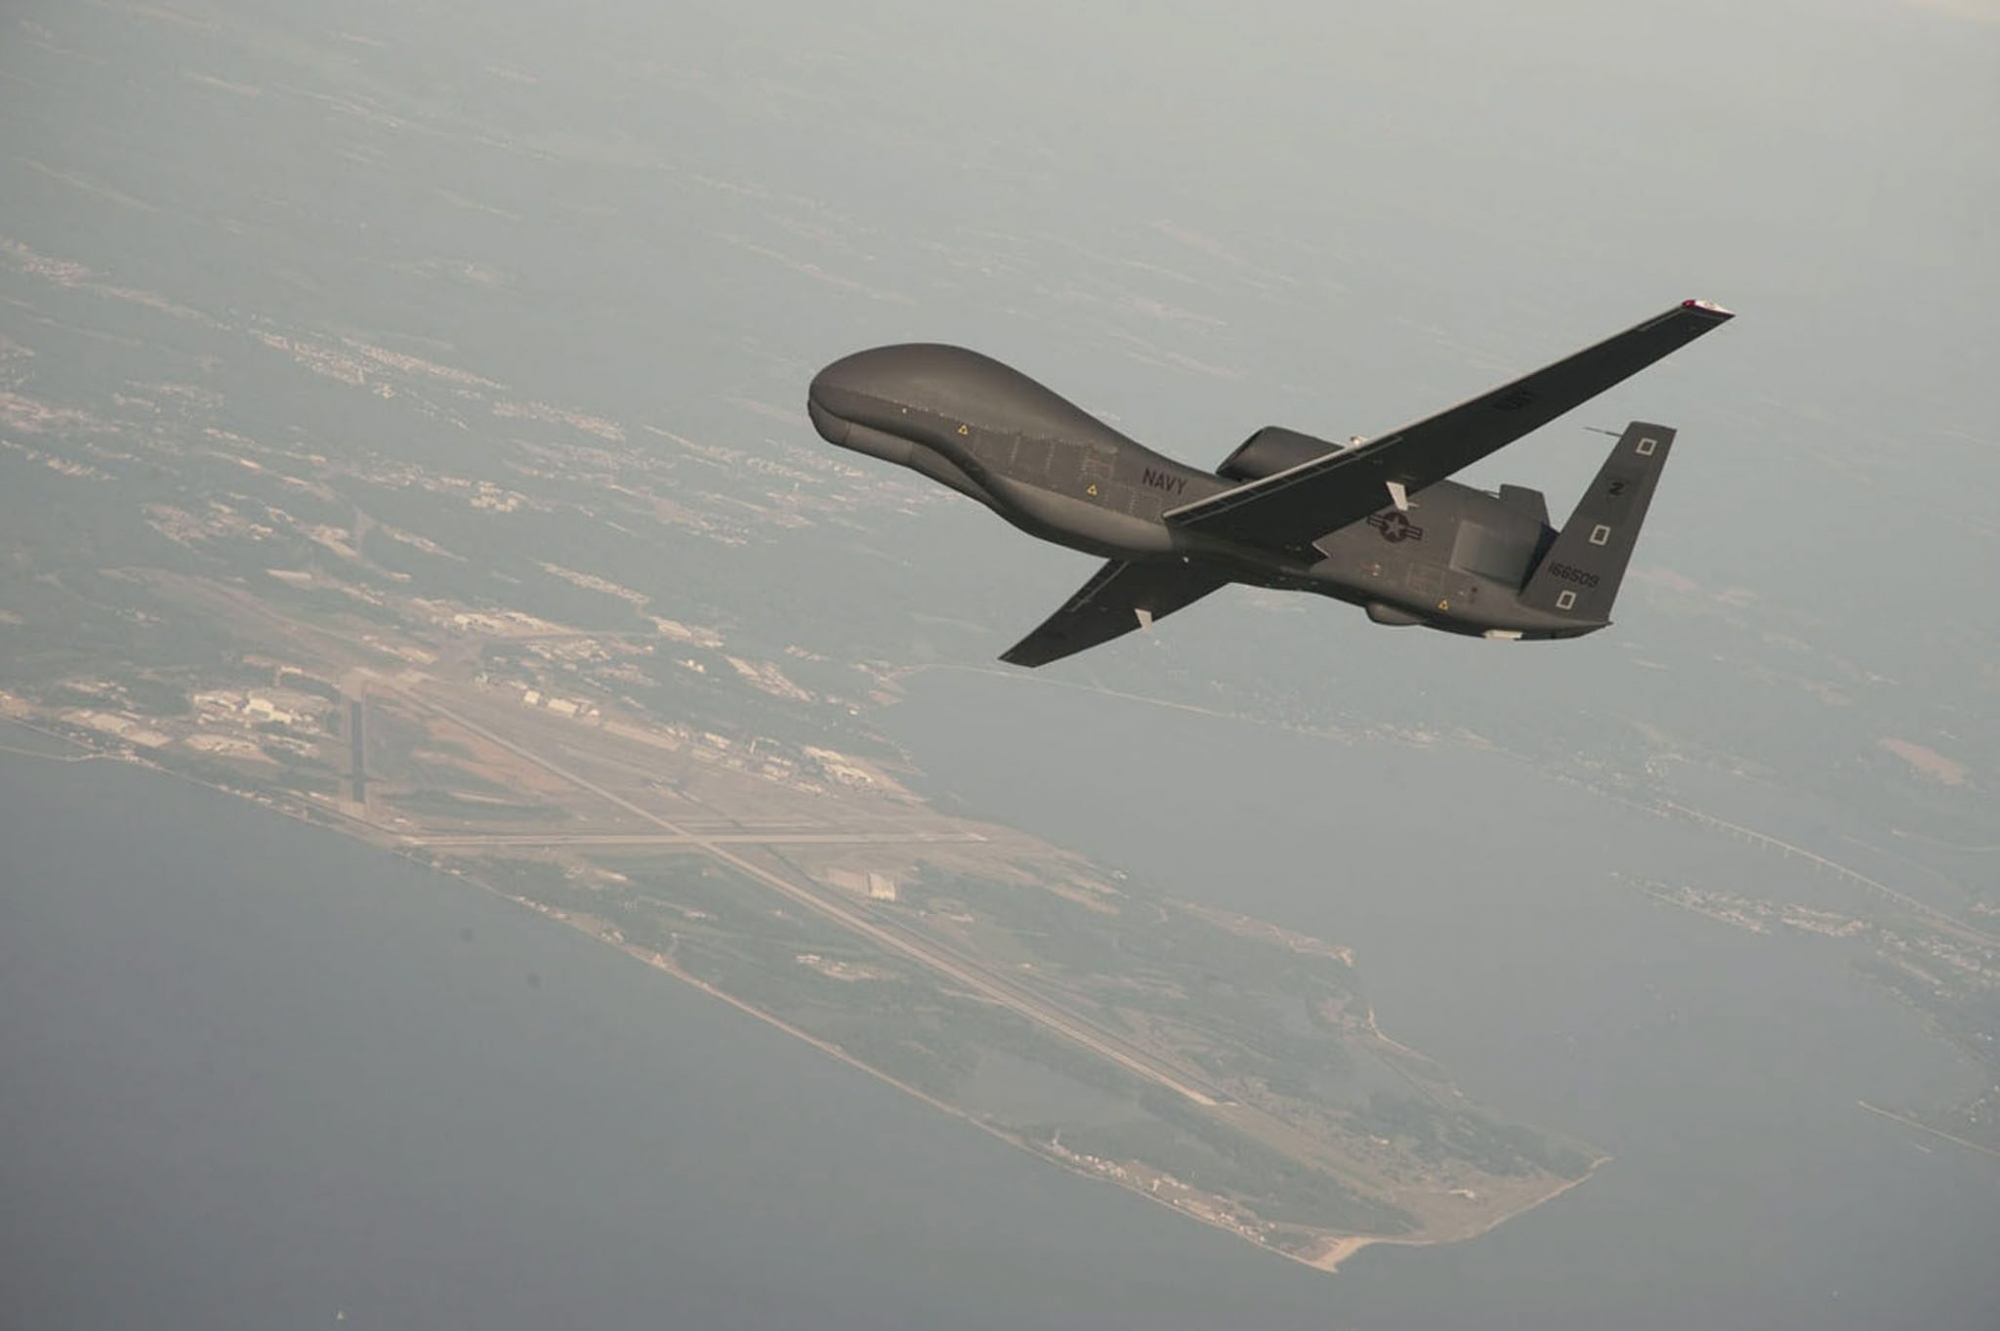 epa07659405 A handout photo made available by the US Navy provided by Northrop Grumman, a RQ-4 Global Hawk  unmanned aerial vehicle conducts tests over Naval Air Station Patuxent River, Maryland, USA 25 June 2010. Media reports on 20 June 2019 state that Iran's Islamic Revolution Guards Corps (IRGC) claim to have shot down a US spy drone over Iranian airspace, near Kuhmobarak in Iran's southern Hormozgan province. The US military has not confirmed if a drone was hit.  EPA/Erik Hildebrandt / US NAVY/  HAN  HANDOUT EDITORIAL USE ONLY/NO SALES USA IRAN DRONE SHOOTING